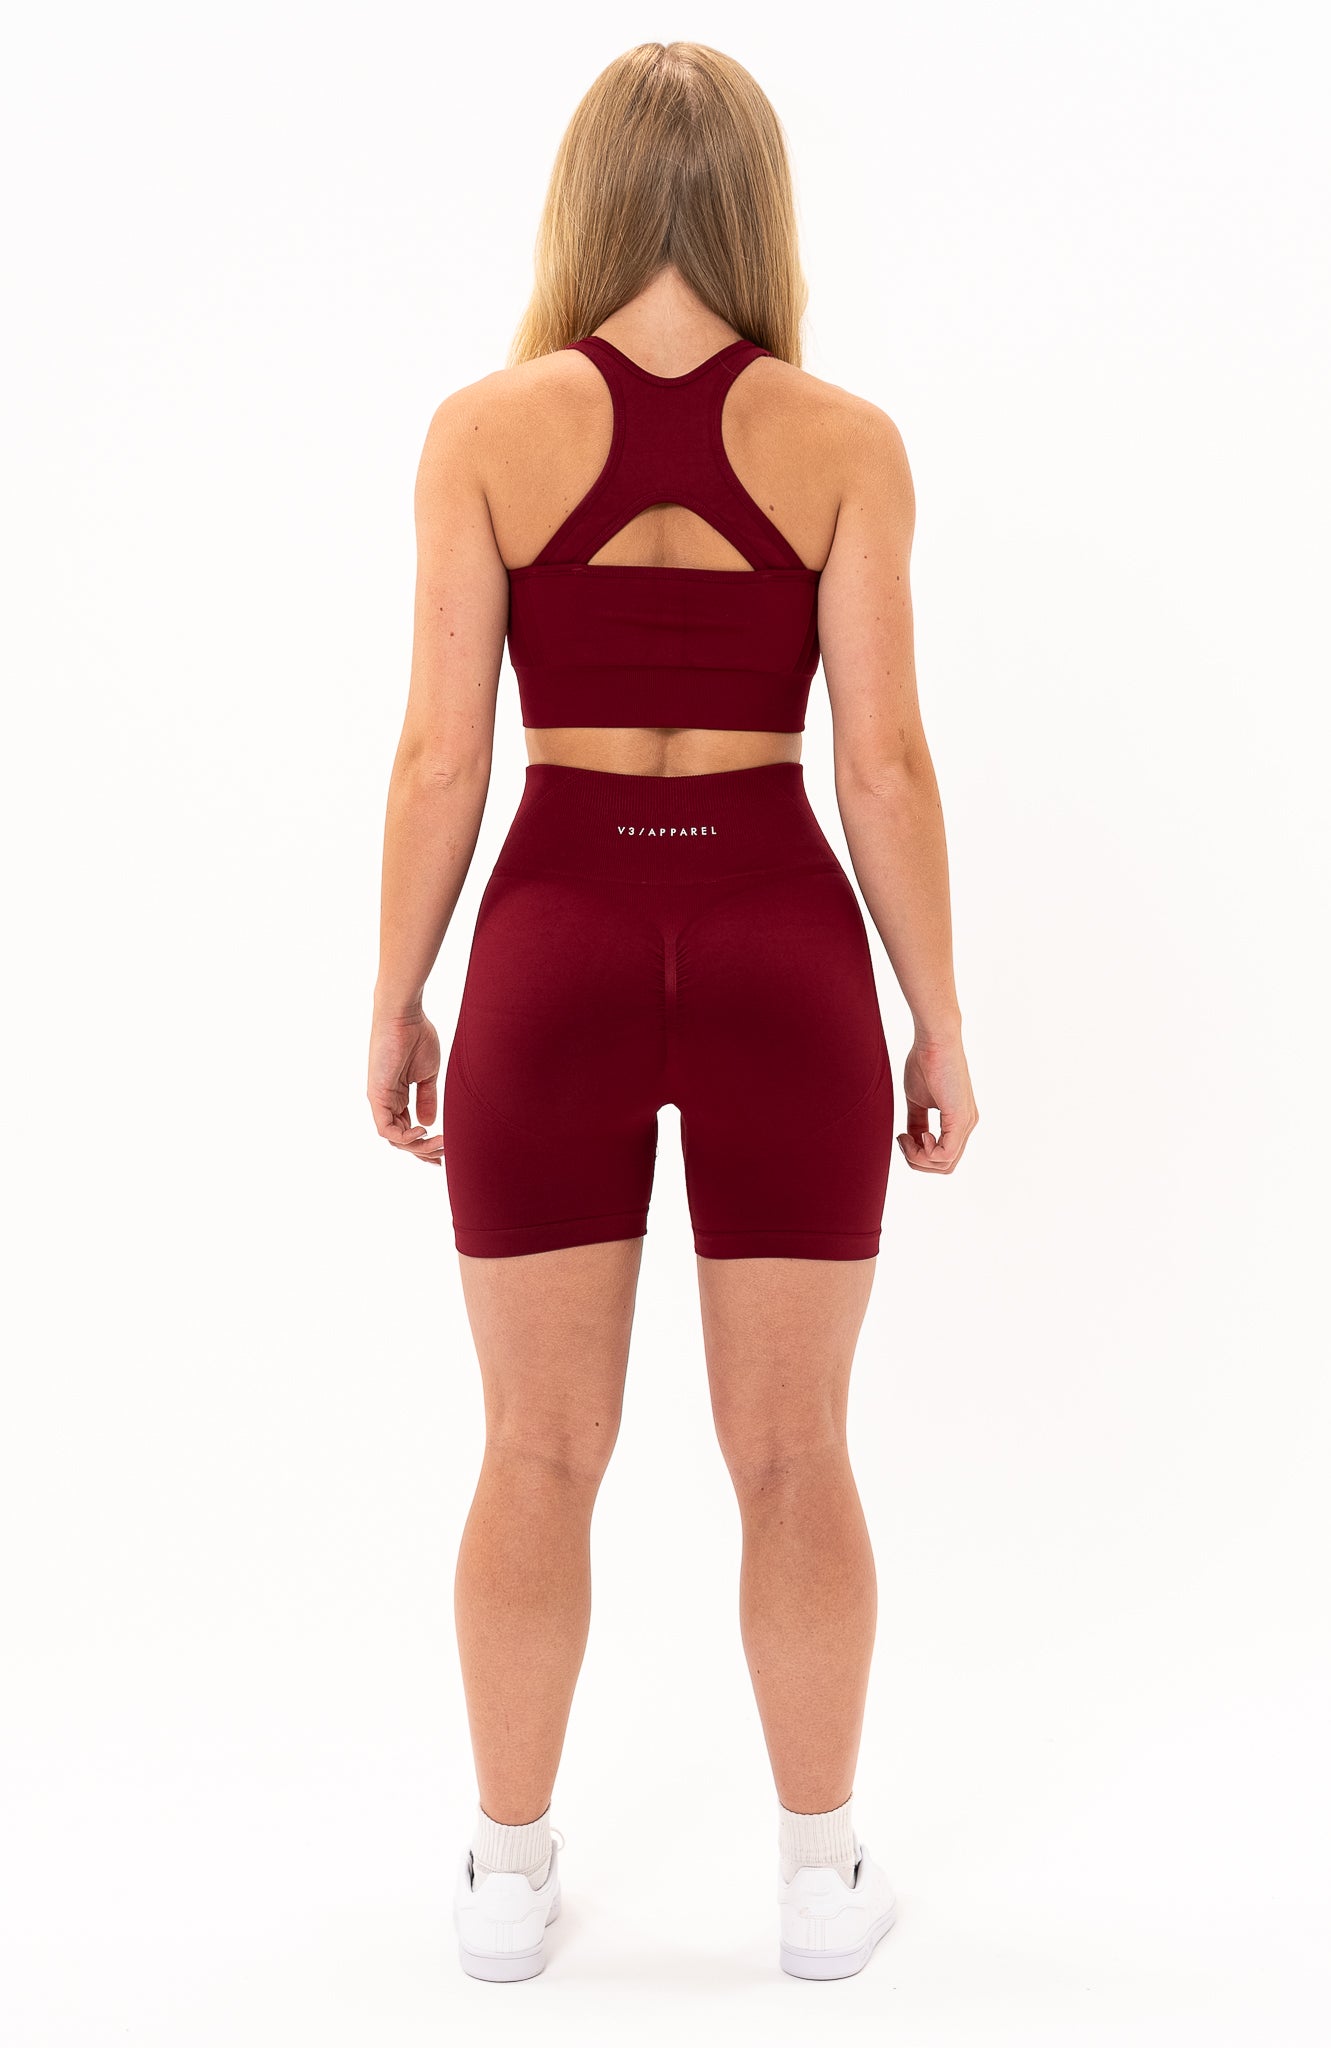 V3 Apparel Women's Tempo seamless scrunch bum shaping high waisted shorts and training sports bra in burgundy red – Squat proof 5 inch leg cycle shorts and training bra for Gym workouts training, Running, yoga, bodybuilding and bikini fitness.